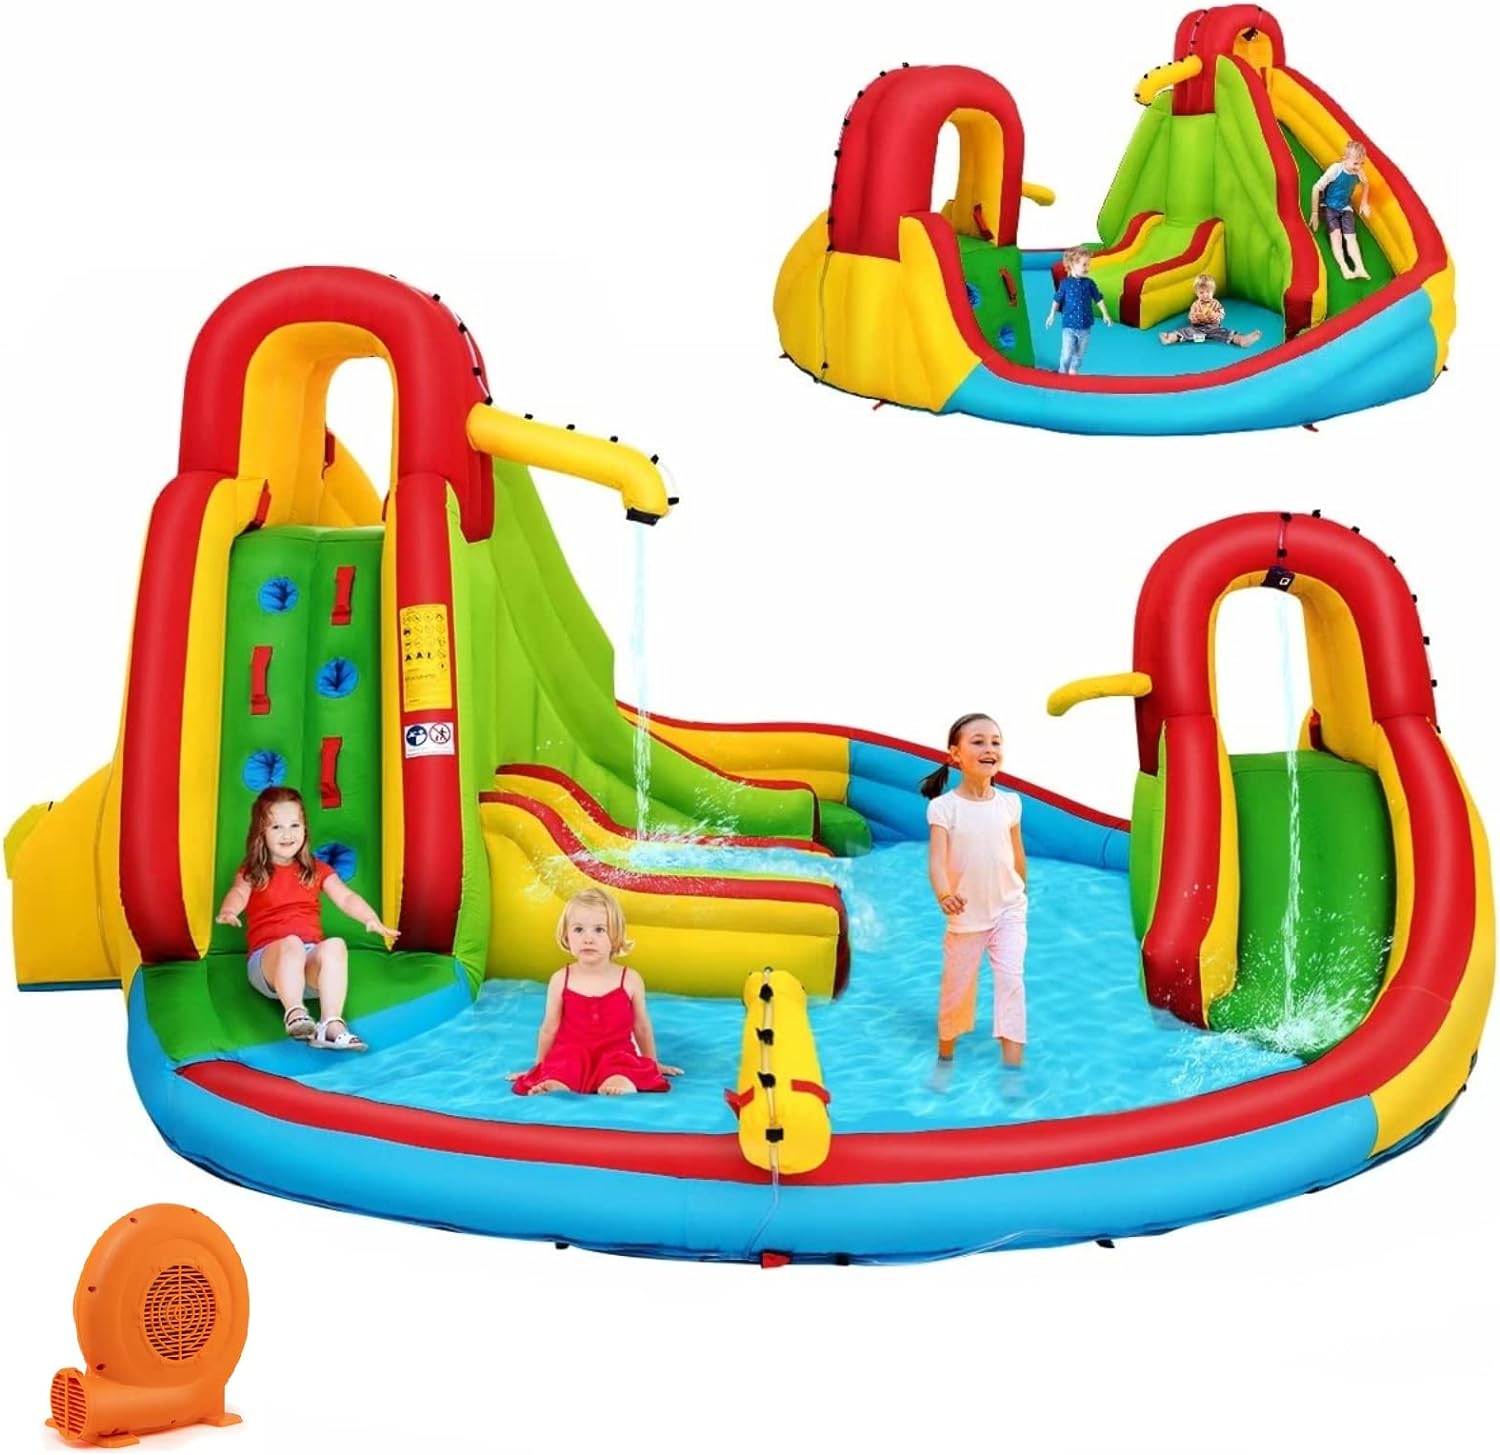 Costzon 7 in 1 Inflatable Water Slide, Mega Waterslide Park for Kids Backyard Fun with GFCI 550W Blower, Double Slides, Splash Pool, Water Slides Inflatables for Kids and Adults Outdoor Party Gifts